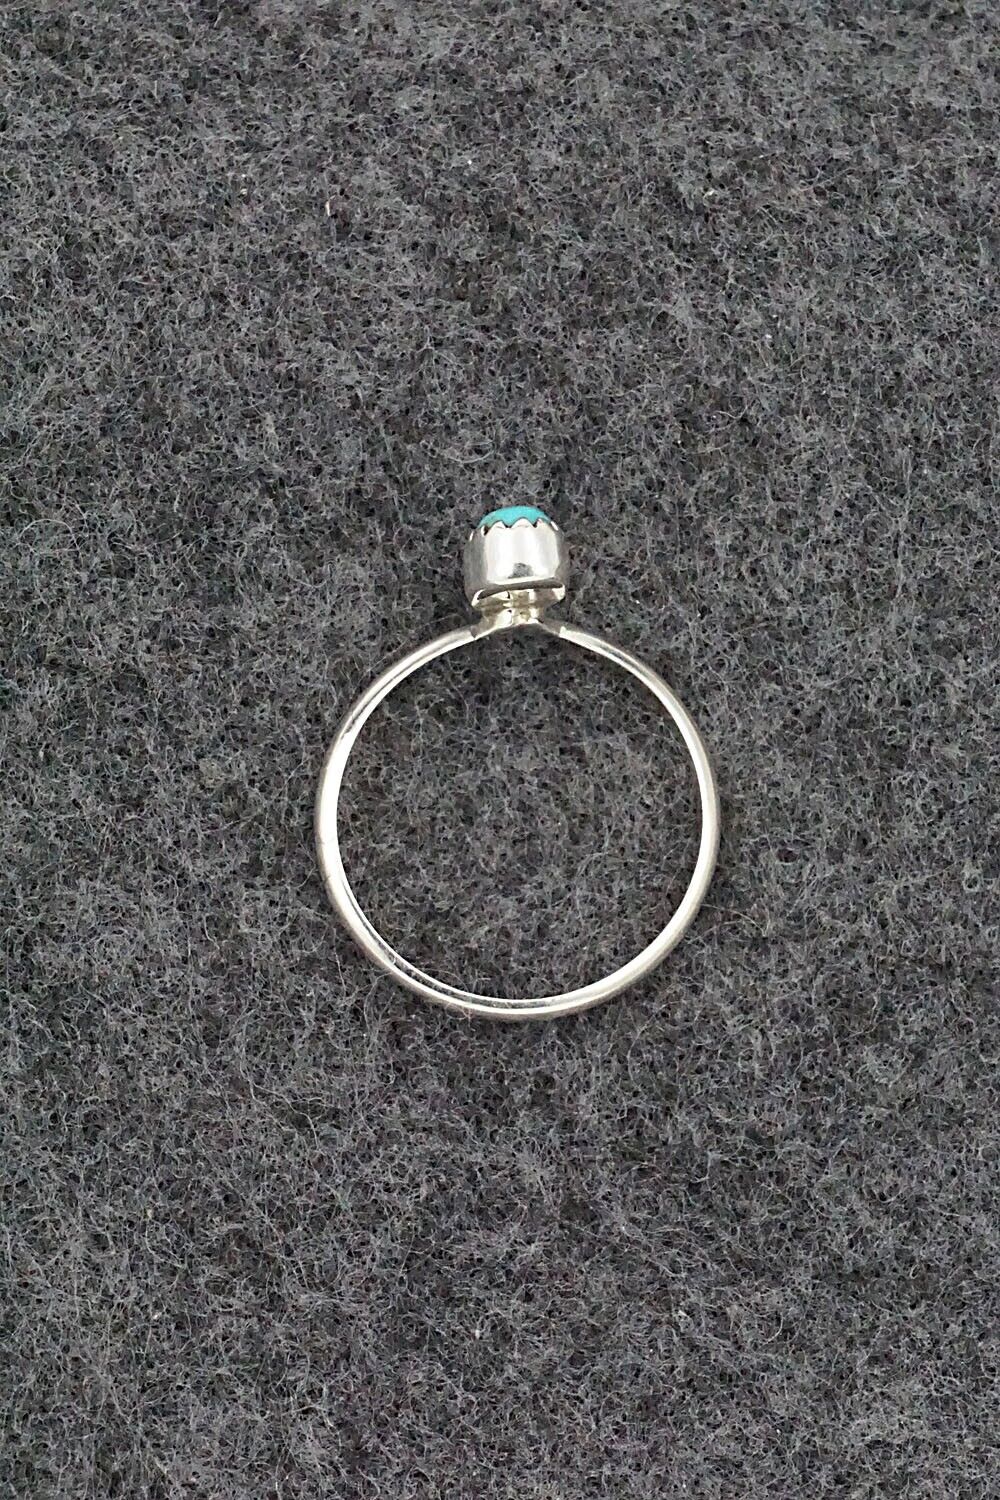 Turquoise & Sterling Silver Ring - Hiram Largo - Size 8